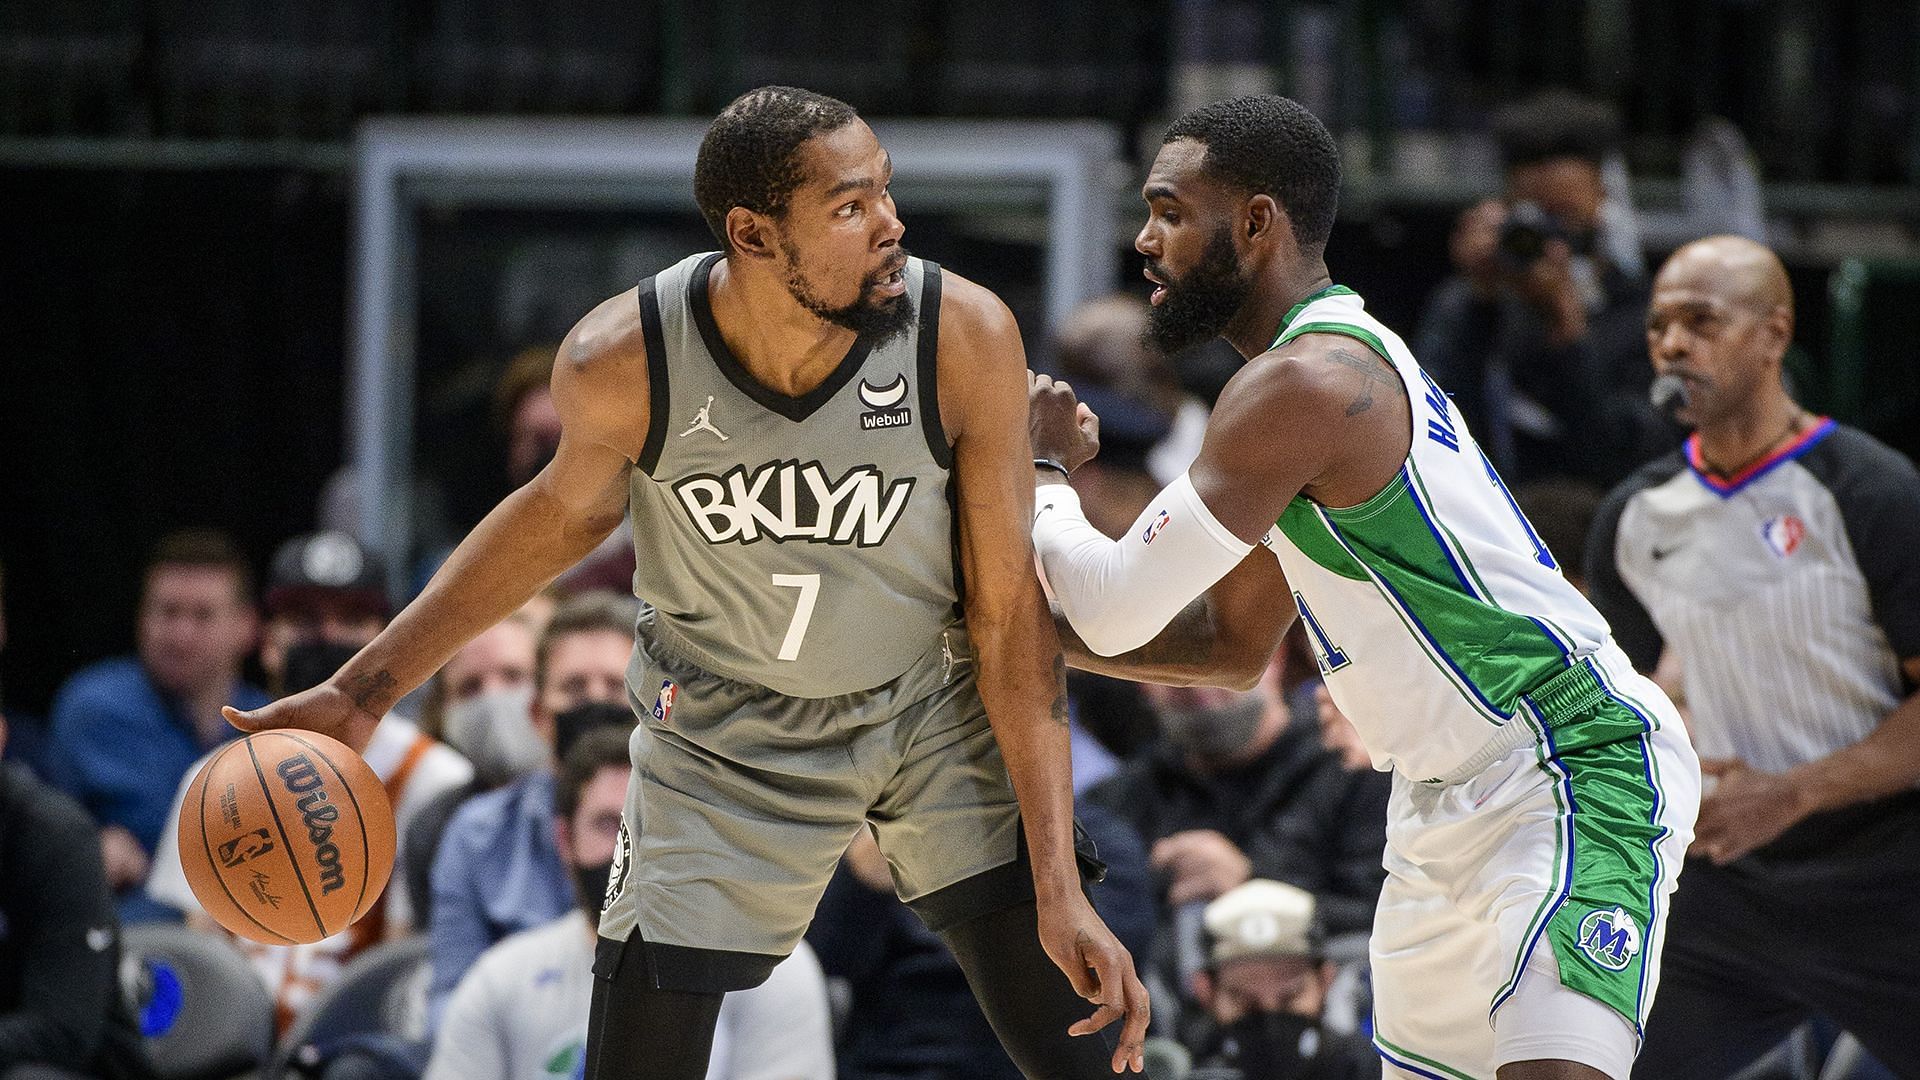 Kevin Durant played great but could not drag the Brooklyn Nets to the win versus the Dallas Mavericks. [NBA.com]